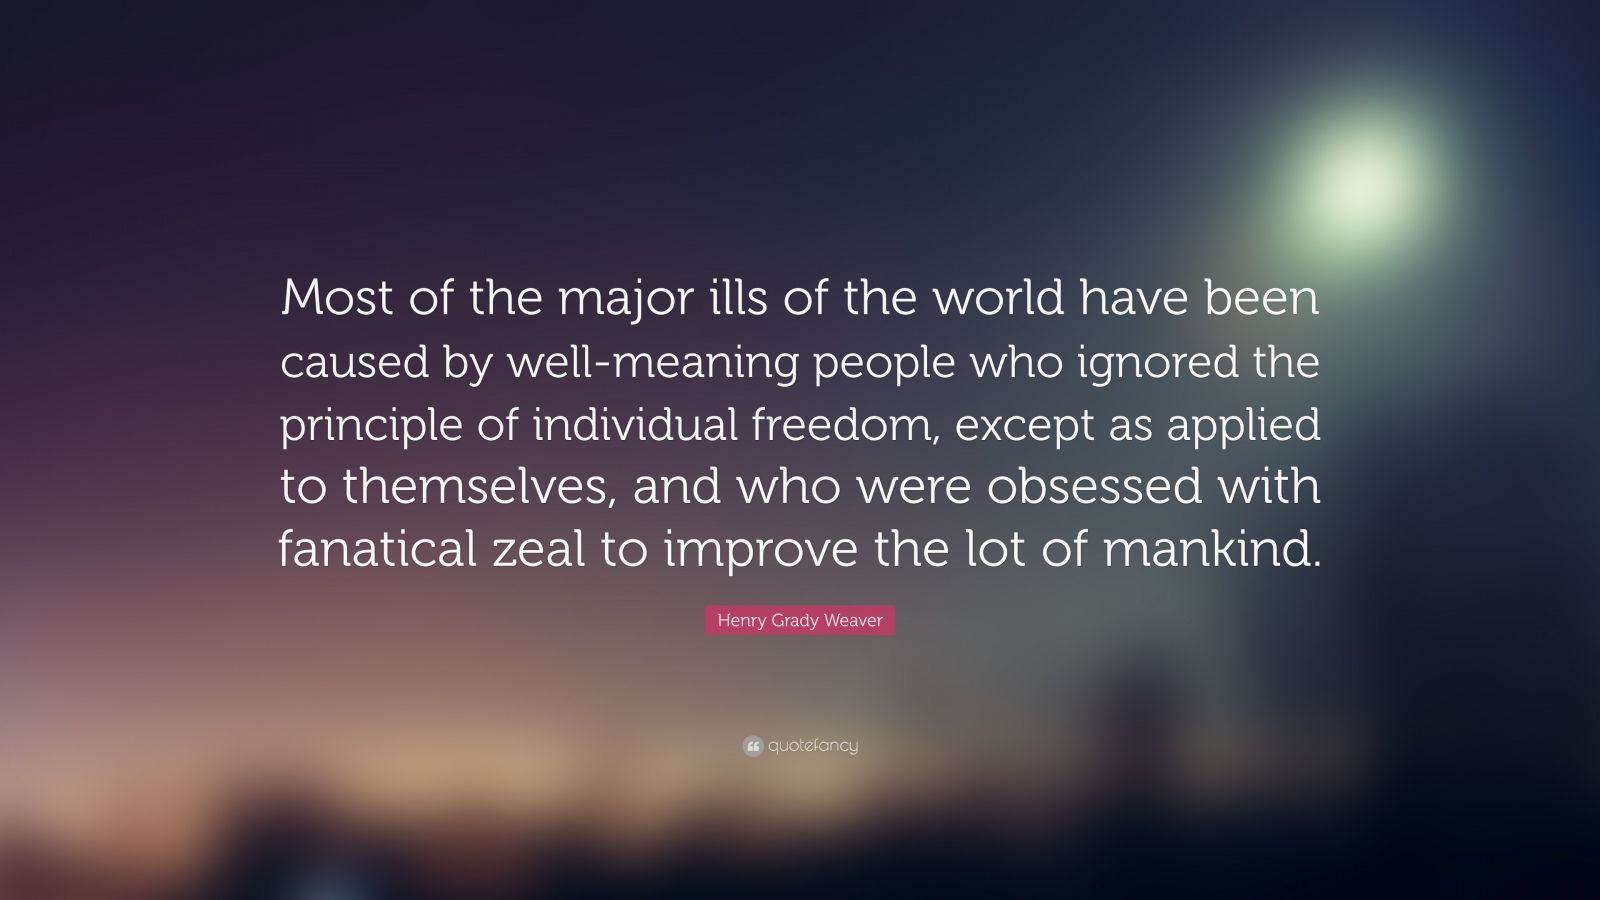 Henry Grady Weaver Quote: “Most of the major ills of the world have ...